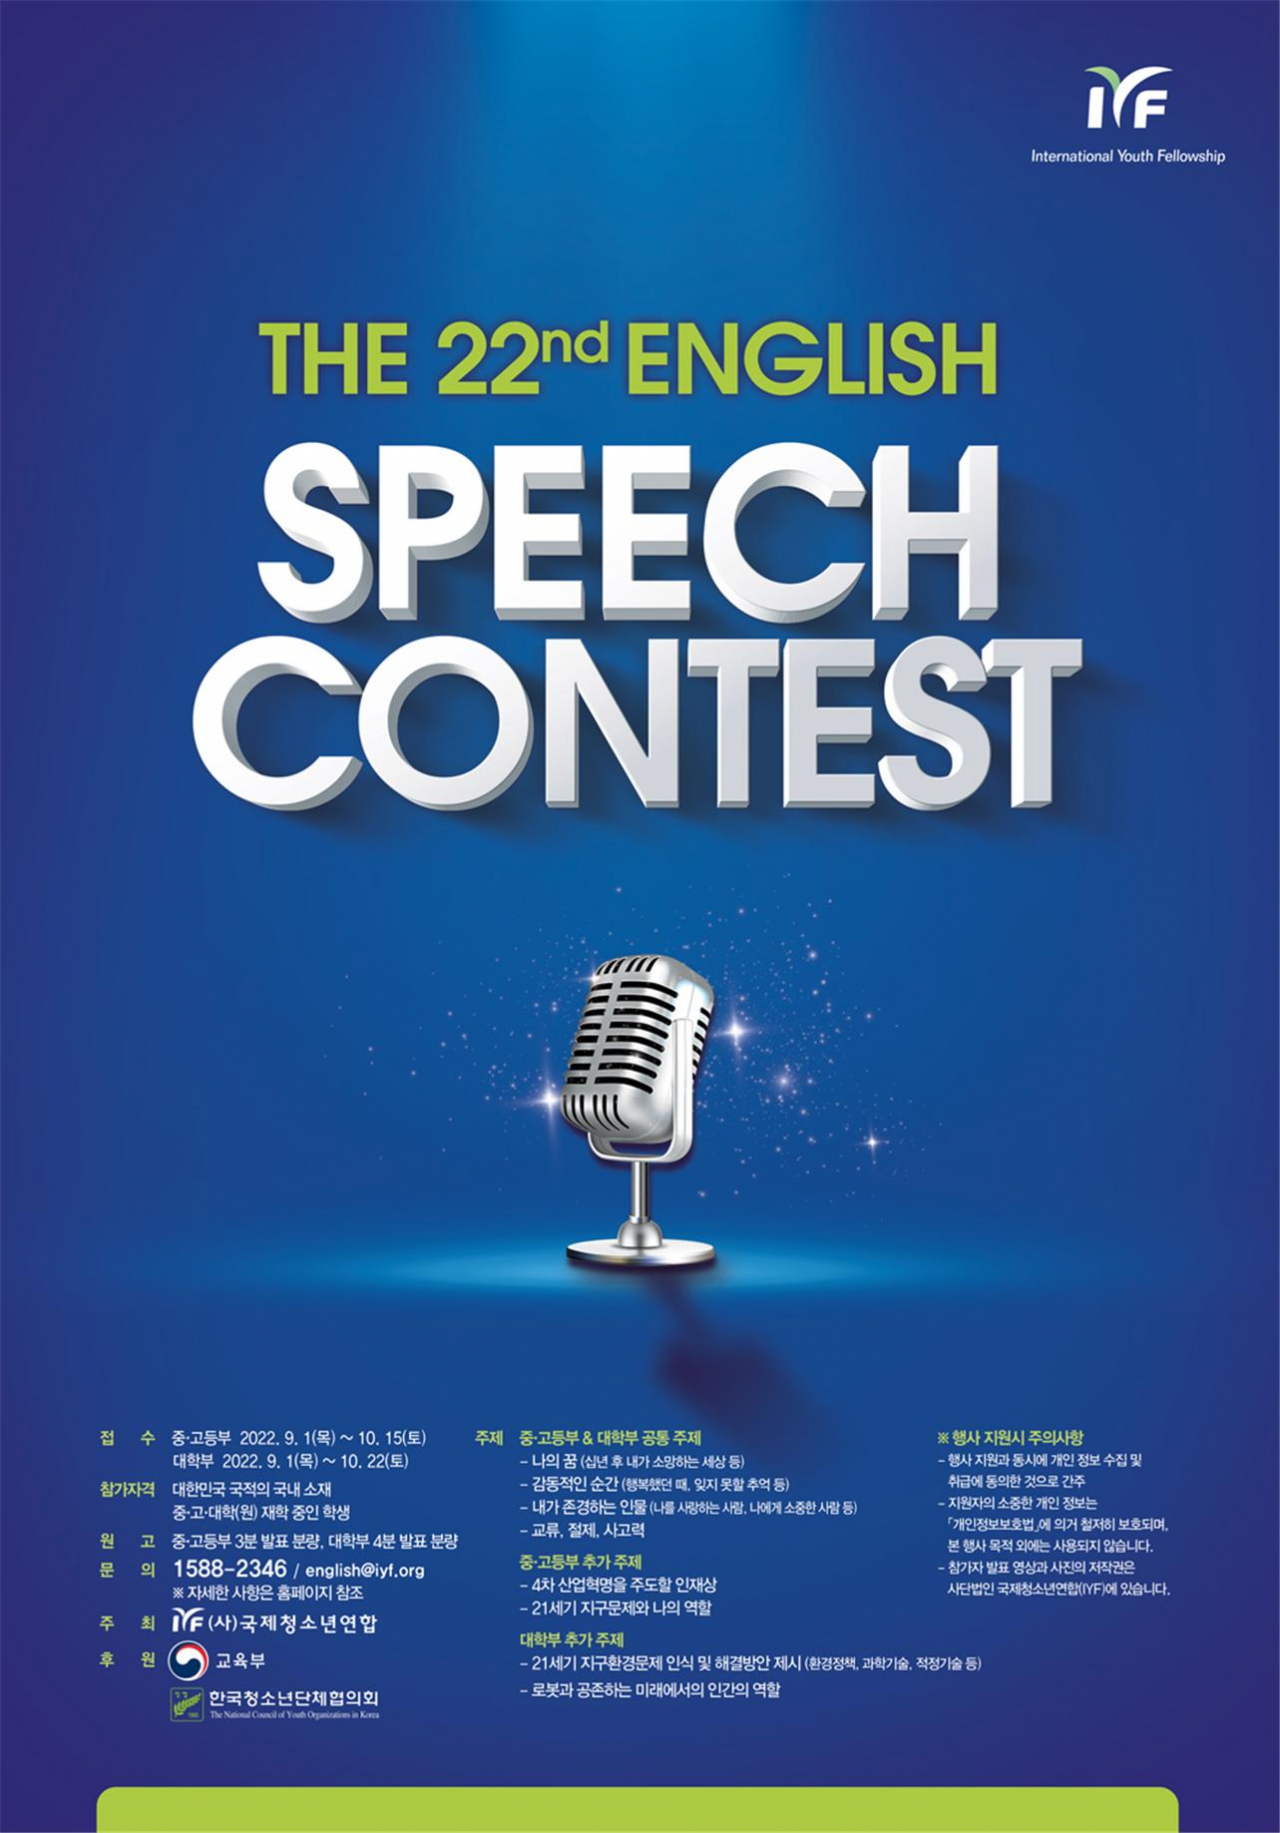 The official poster of 22nd IYF English Speech Contest (International Youth Fellowship)